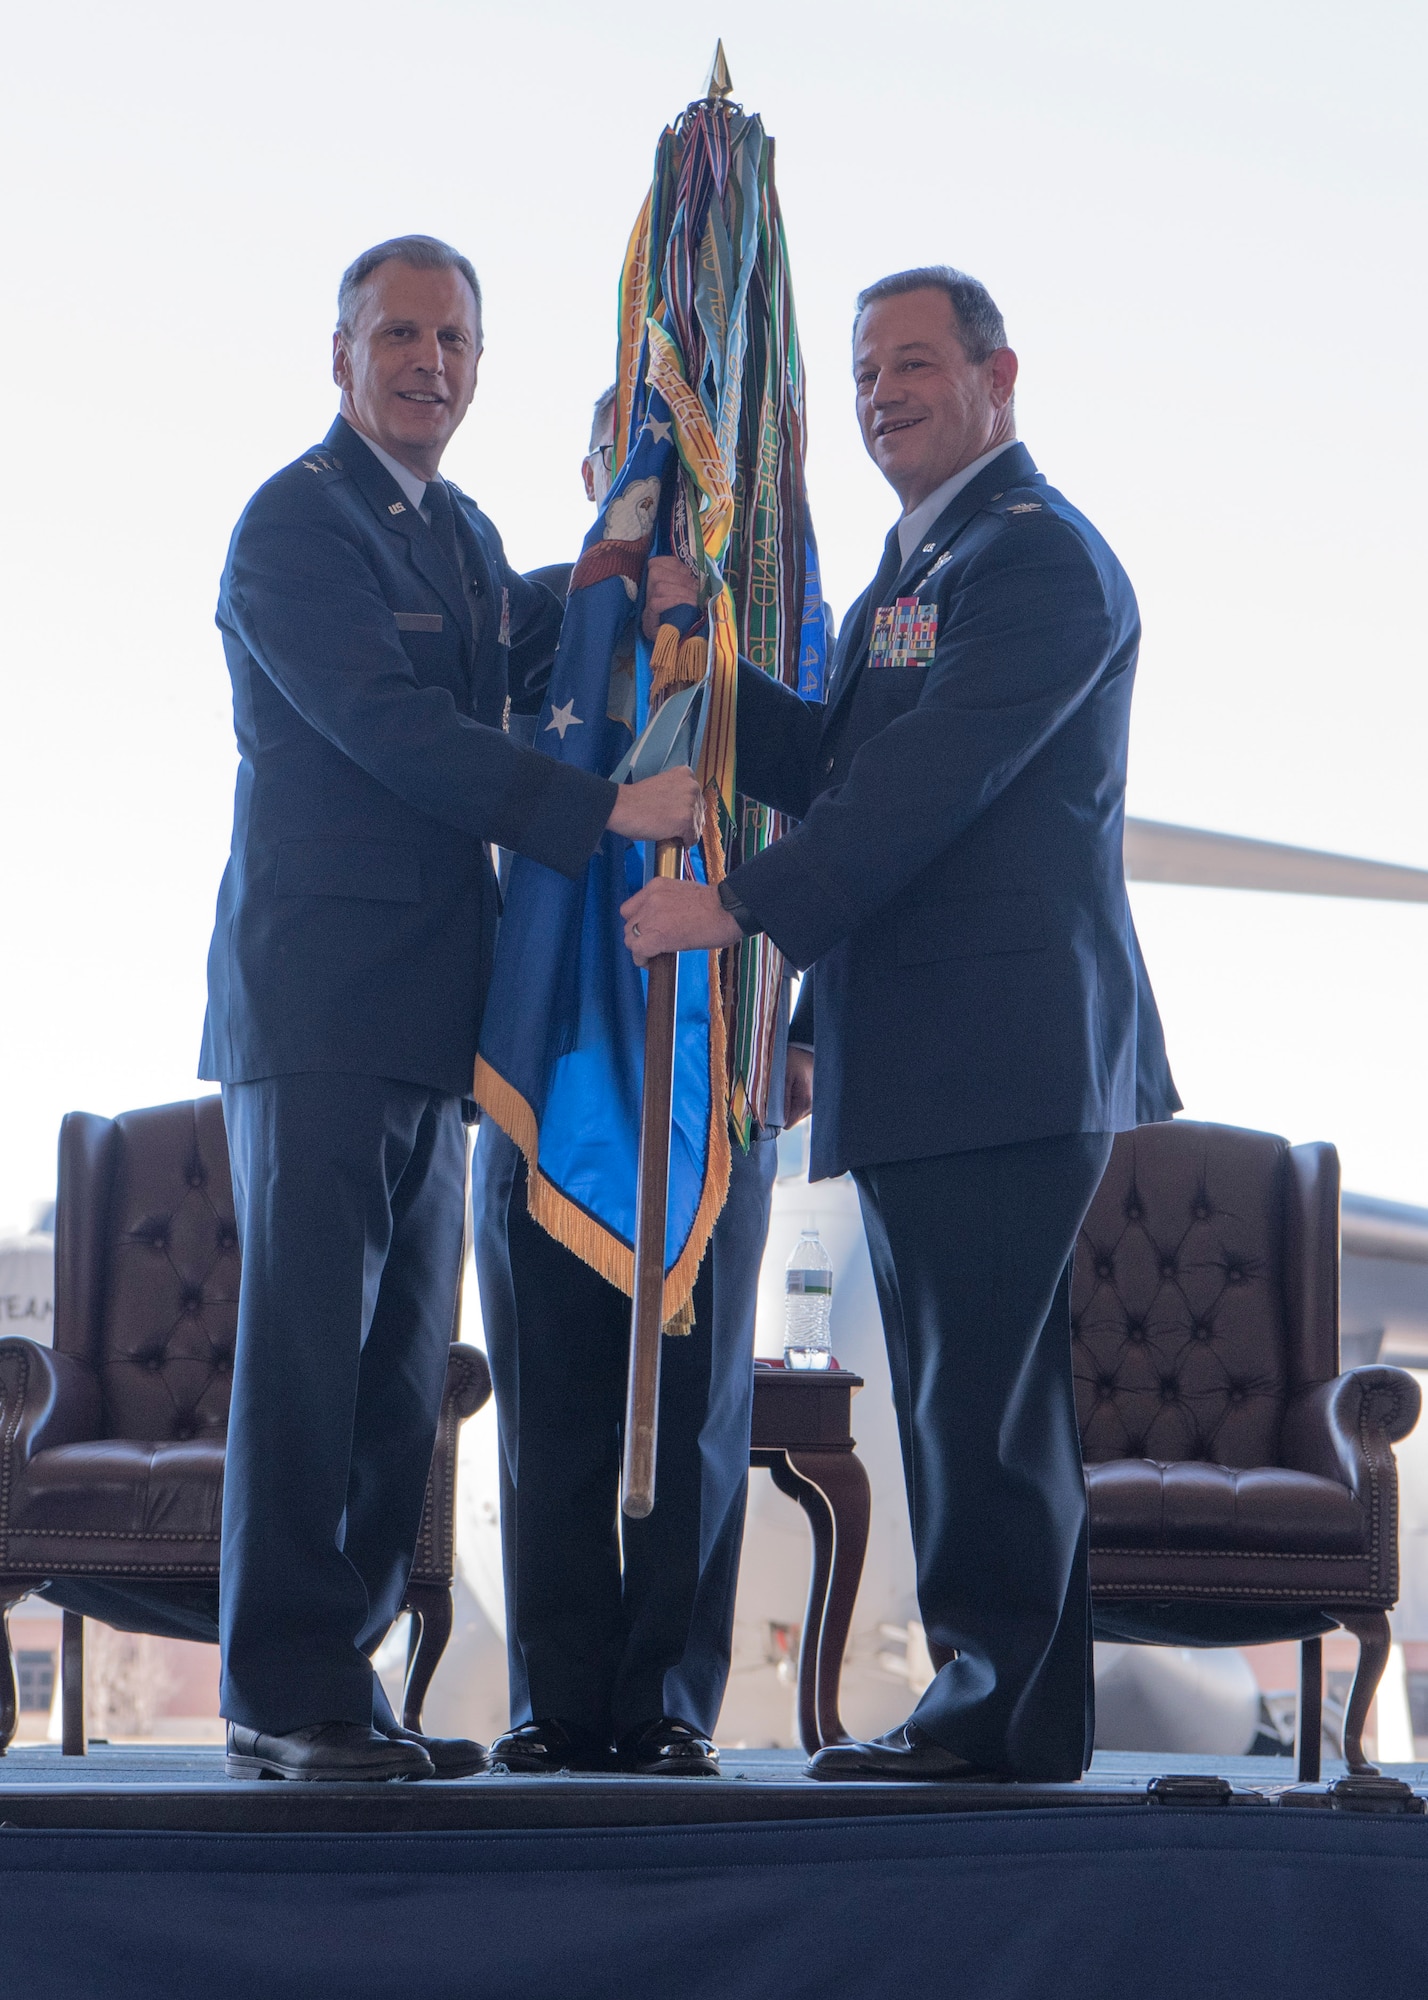 Col. Adam Willis, right, incoming 315th Airlift Wing commander, takes command during a change of command ceremony officiated by Maj. Gen. Randall Ogden, left, U.S. Air Force 4th Air Force Commander, at Nose Dock 2 here, Dec. 7. Willis replaced Col. Gregory Gilmour, right, as the 315th Airlift Wing commander.